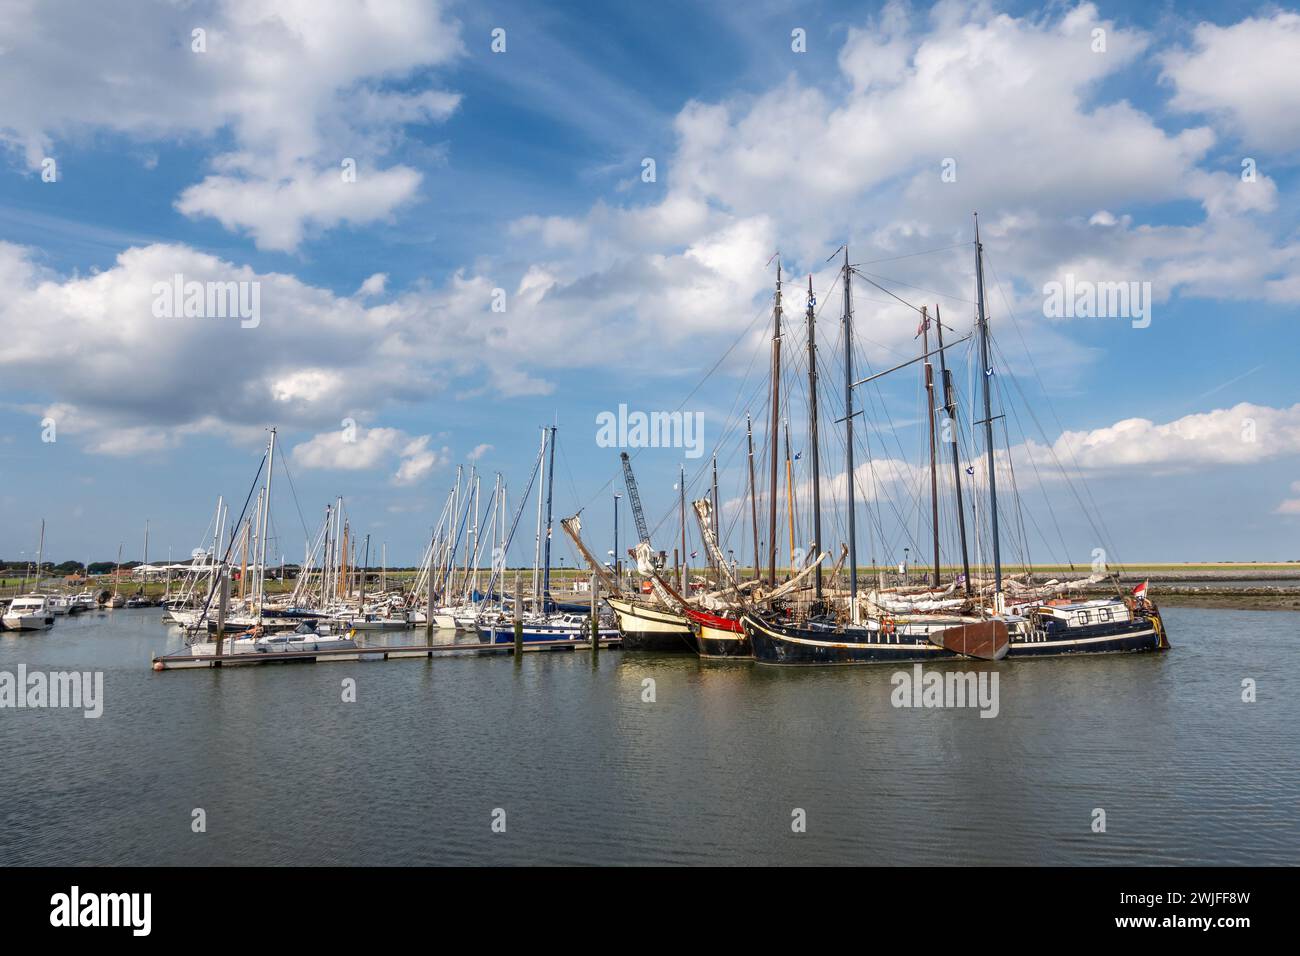 Sailing boats in Waddenhaven Marina on the West Frisian island of Ameland, located at the Wadden Sea, Netherlands Stock Photo